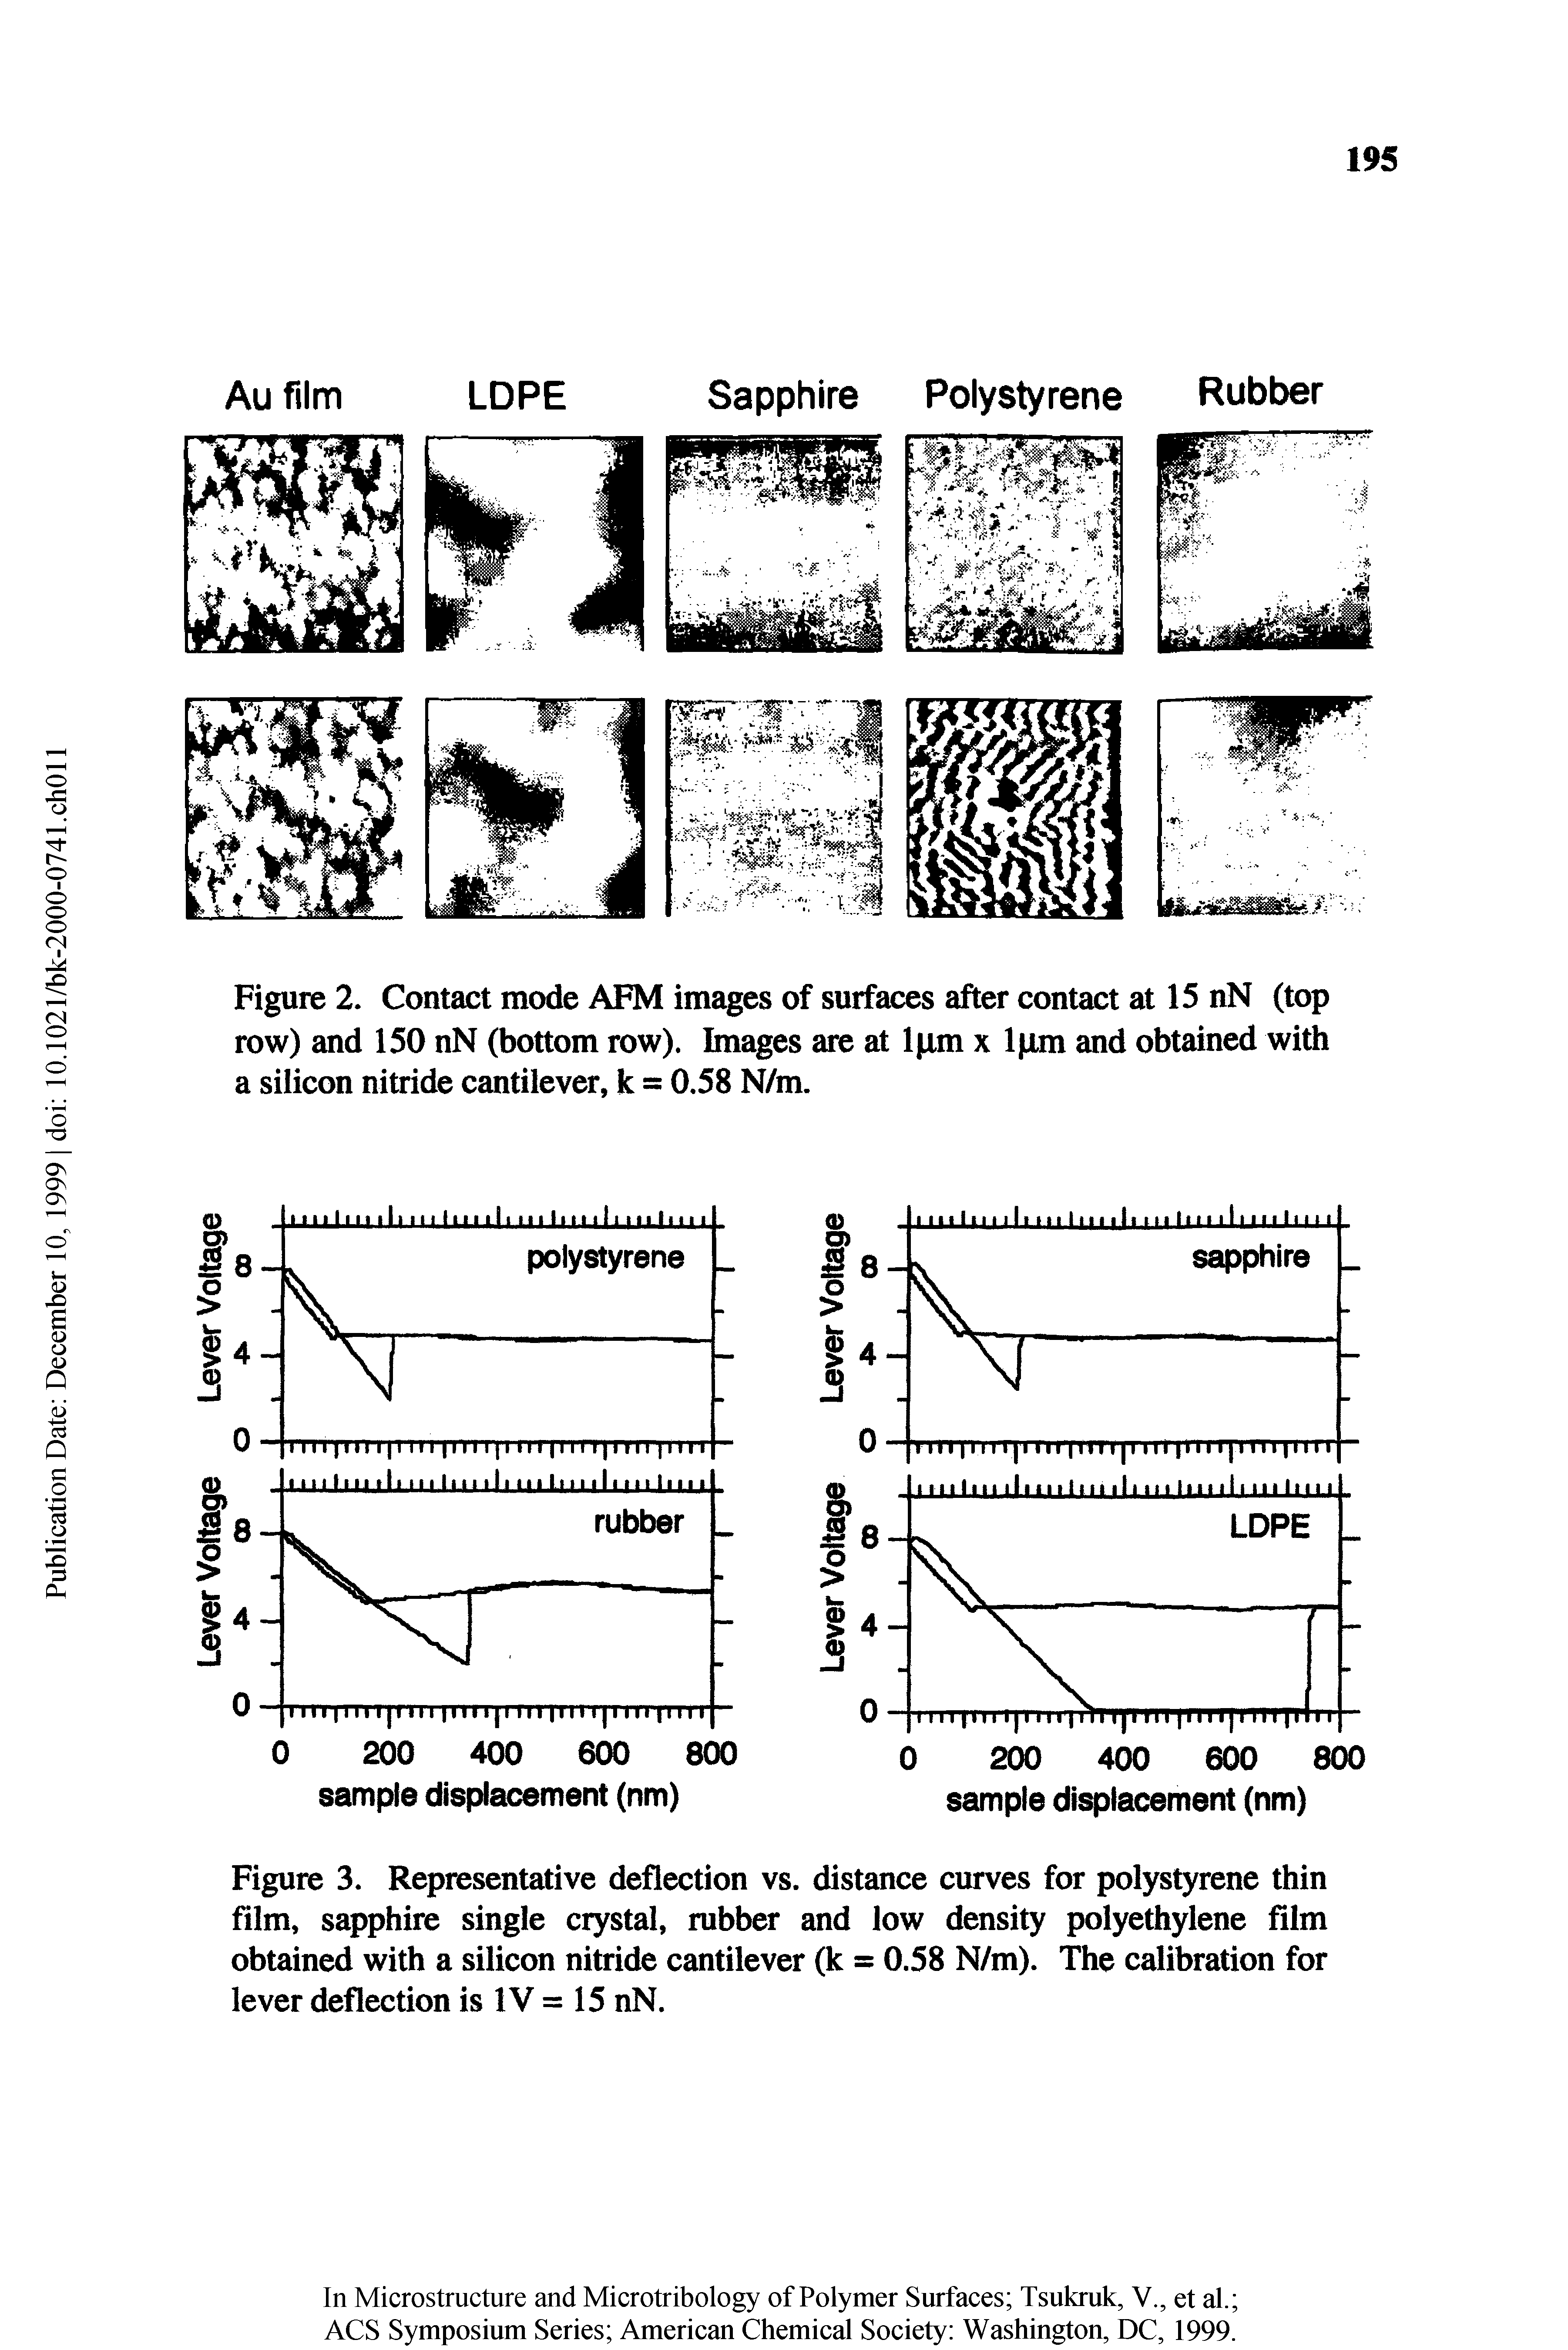 Figure 2. Contact mode AFM ims es of surfaces after contact at 15 nN (top row) and 150 nN (bottom row). Images are at 1pm x 1pm and obtained with a silicon nitride cantilever, k = 0.58 N/m.